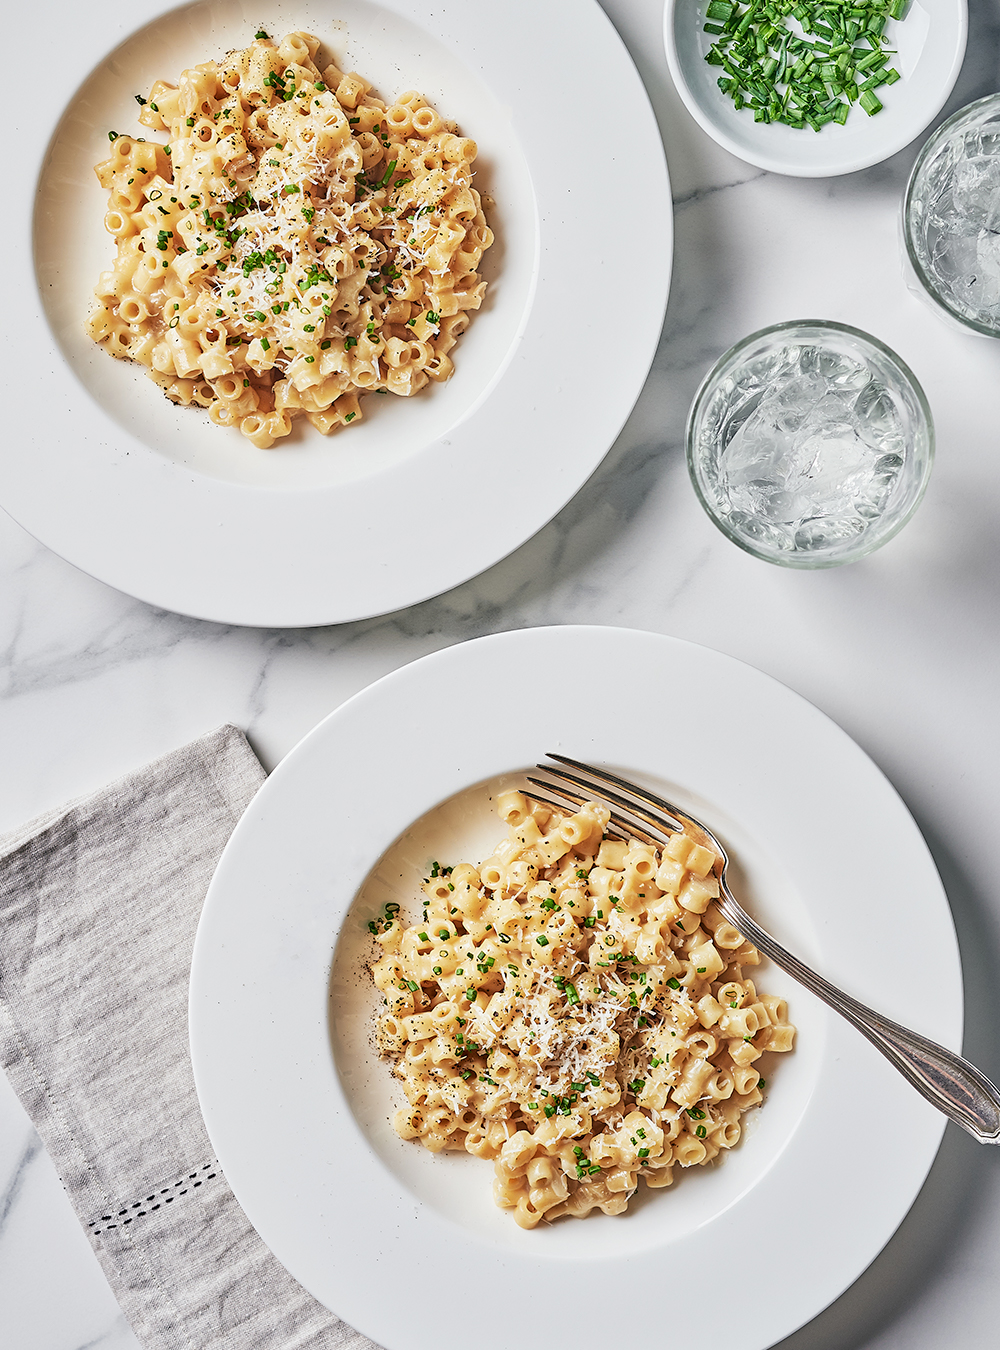 Risotto-Style Pasta with Saint-Honoré Cheese